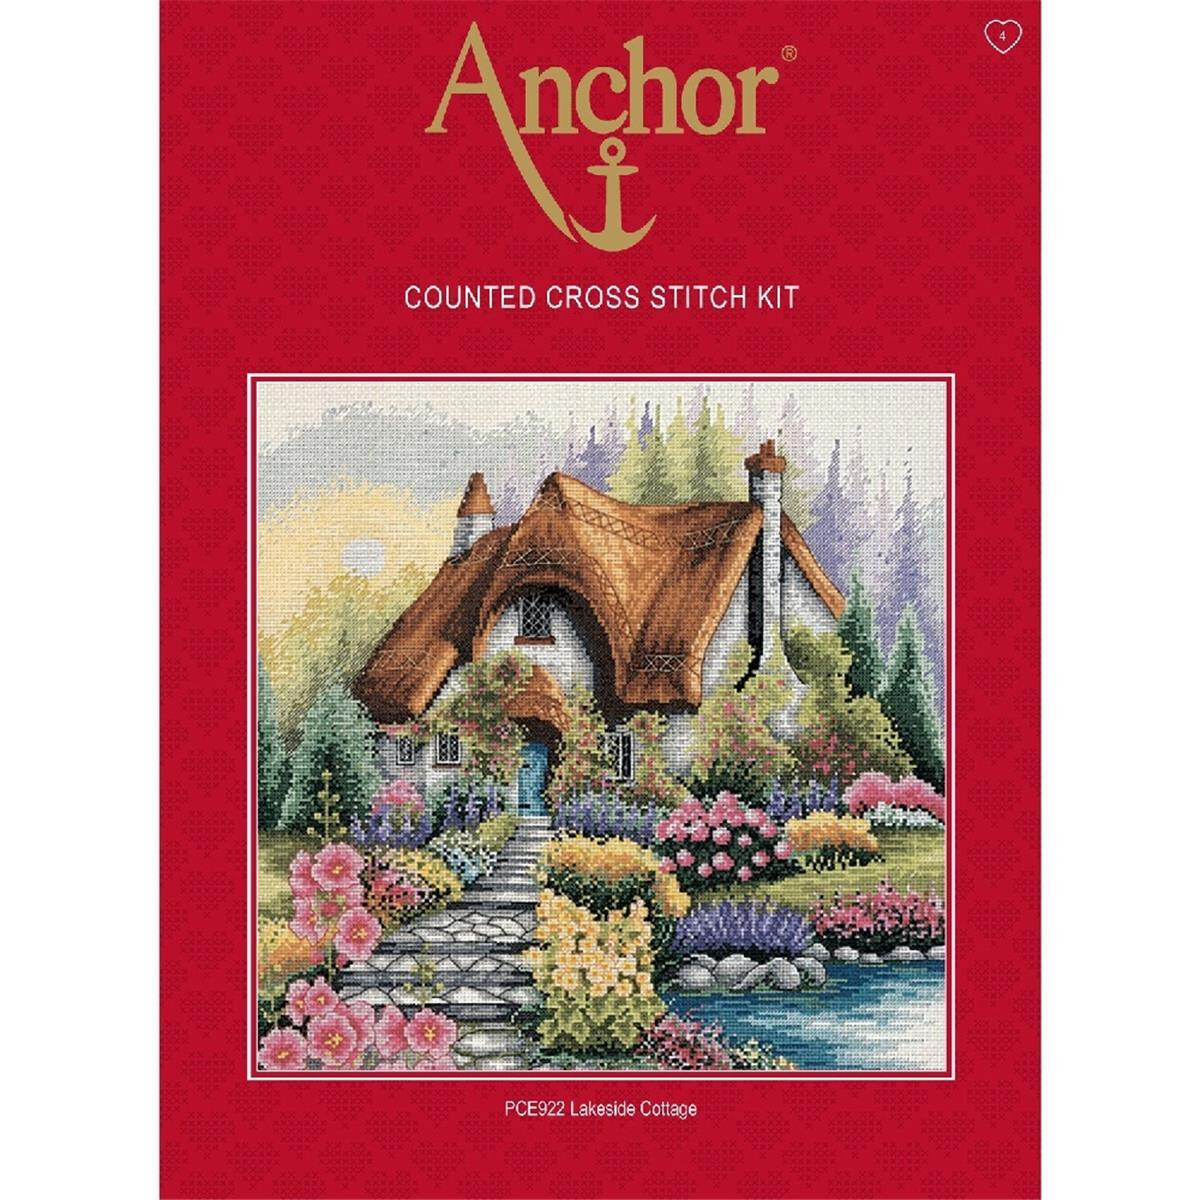 Anchor counted Cross Stitch kit "Lakeside...